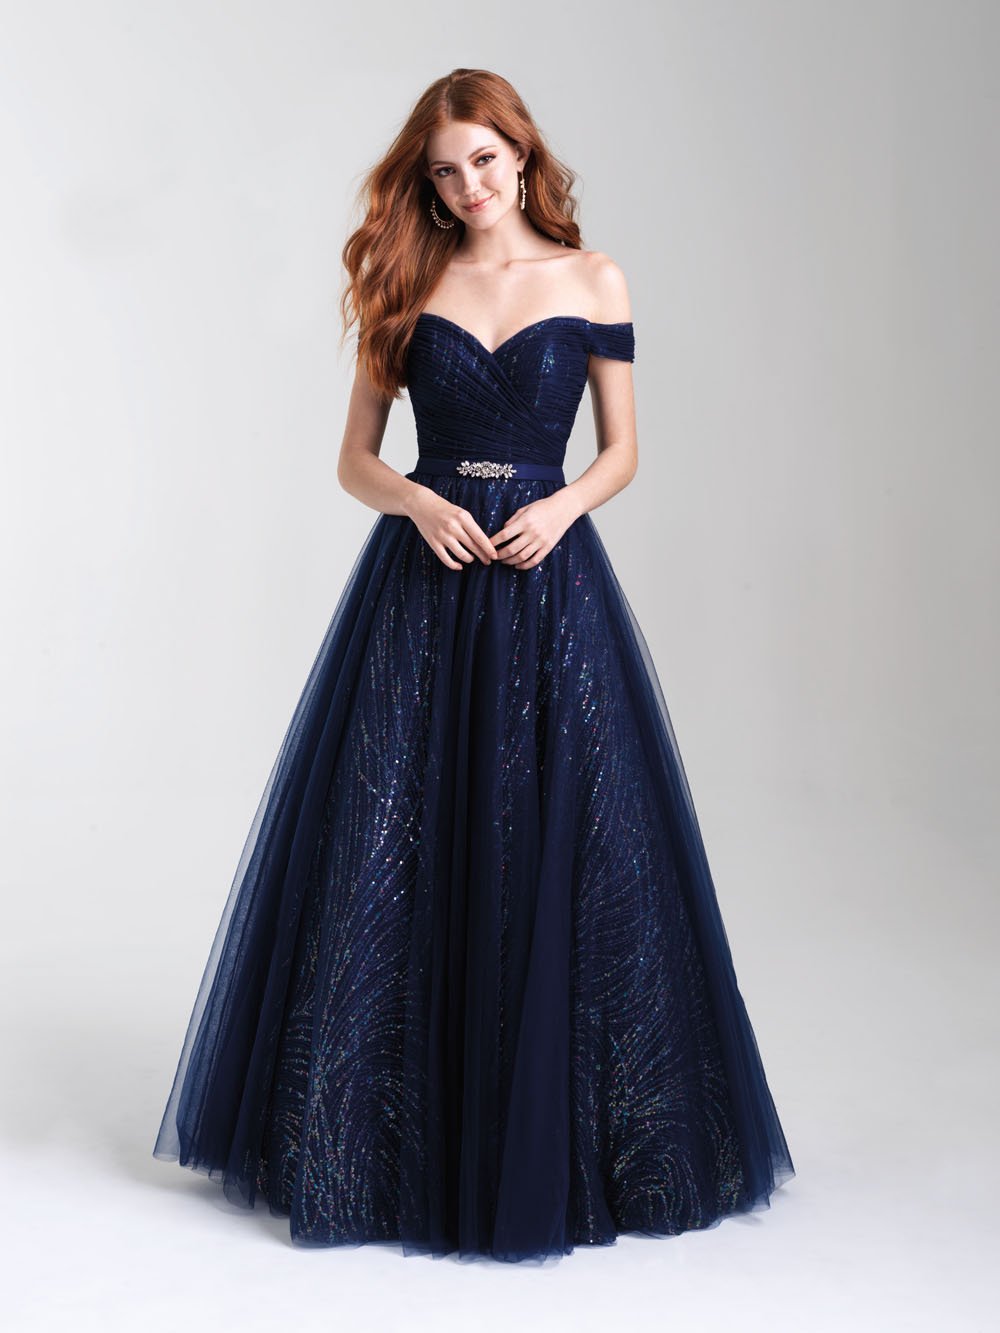 Madison James 20-336 dress images in these colors: Navy, Wine, Gold.